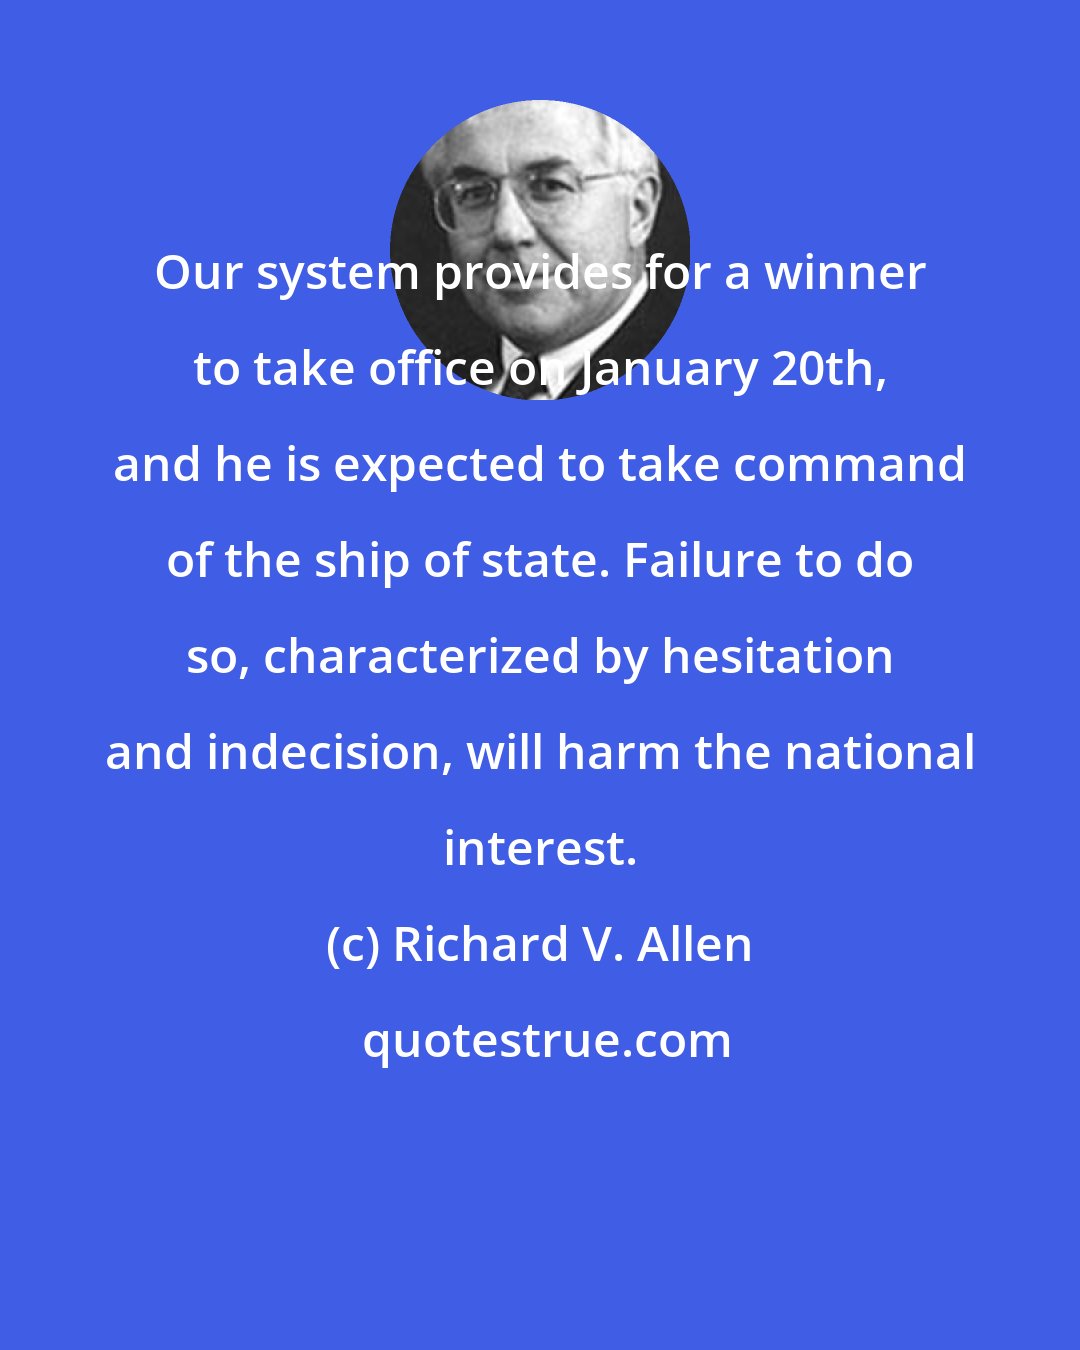 Richard V. Allen: Our system provides for a winner to take office on January 20th, and he is expected to take command of the ship of state. Failure to do so, characterized by hesitation and indecision, will harm the national interest.